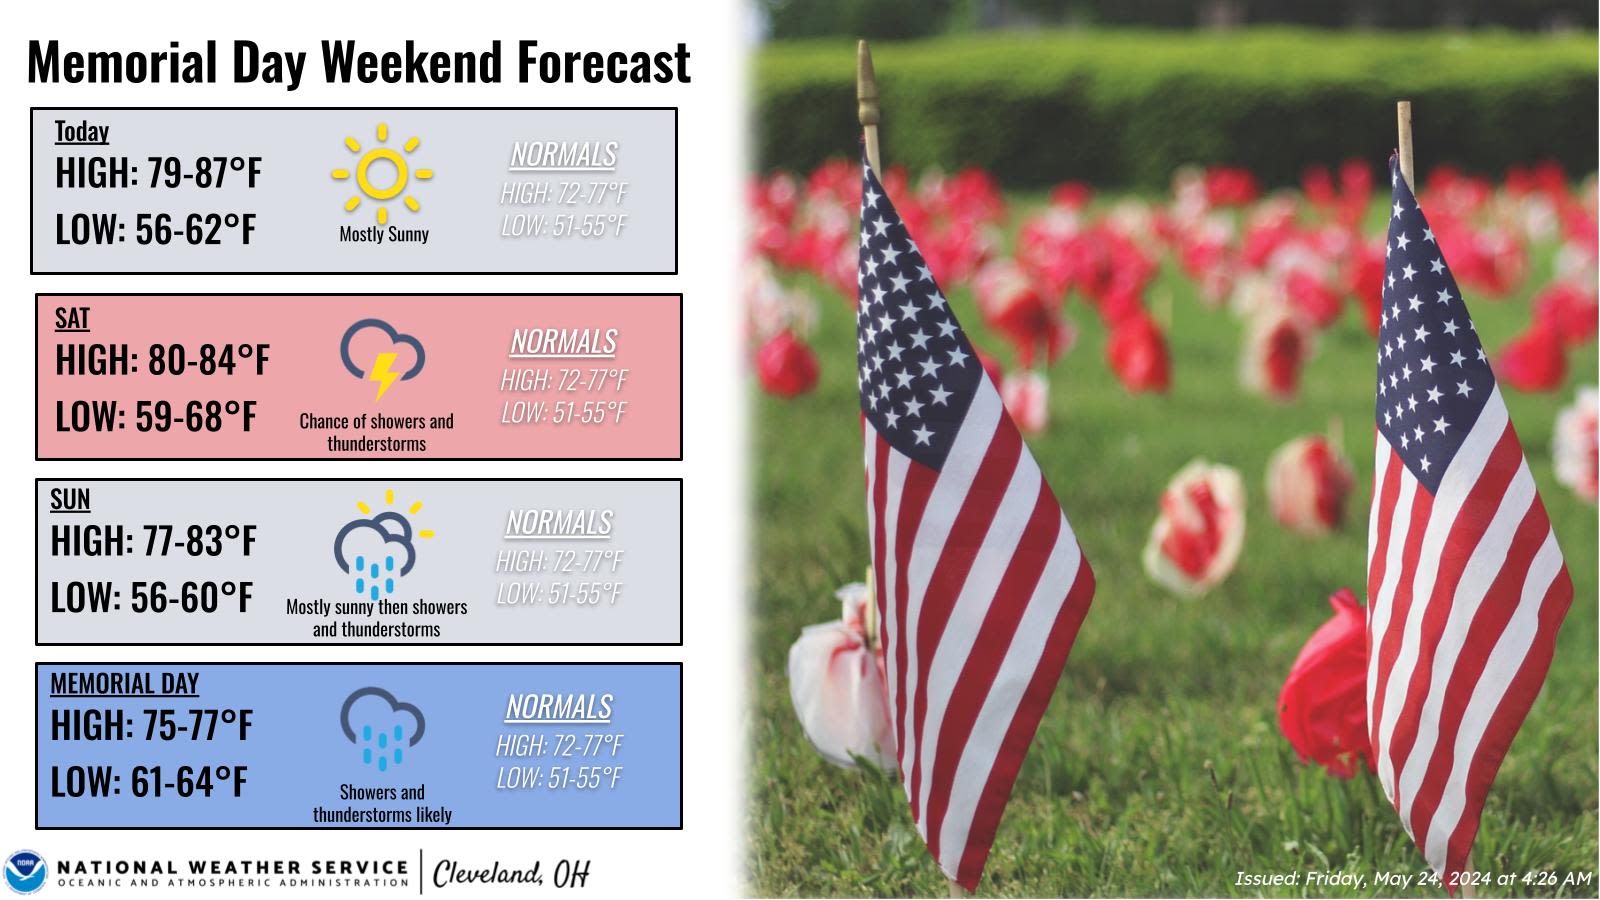 Friday is looking clear while rest of Memorial Day weekend has chance of thunderstorms